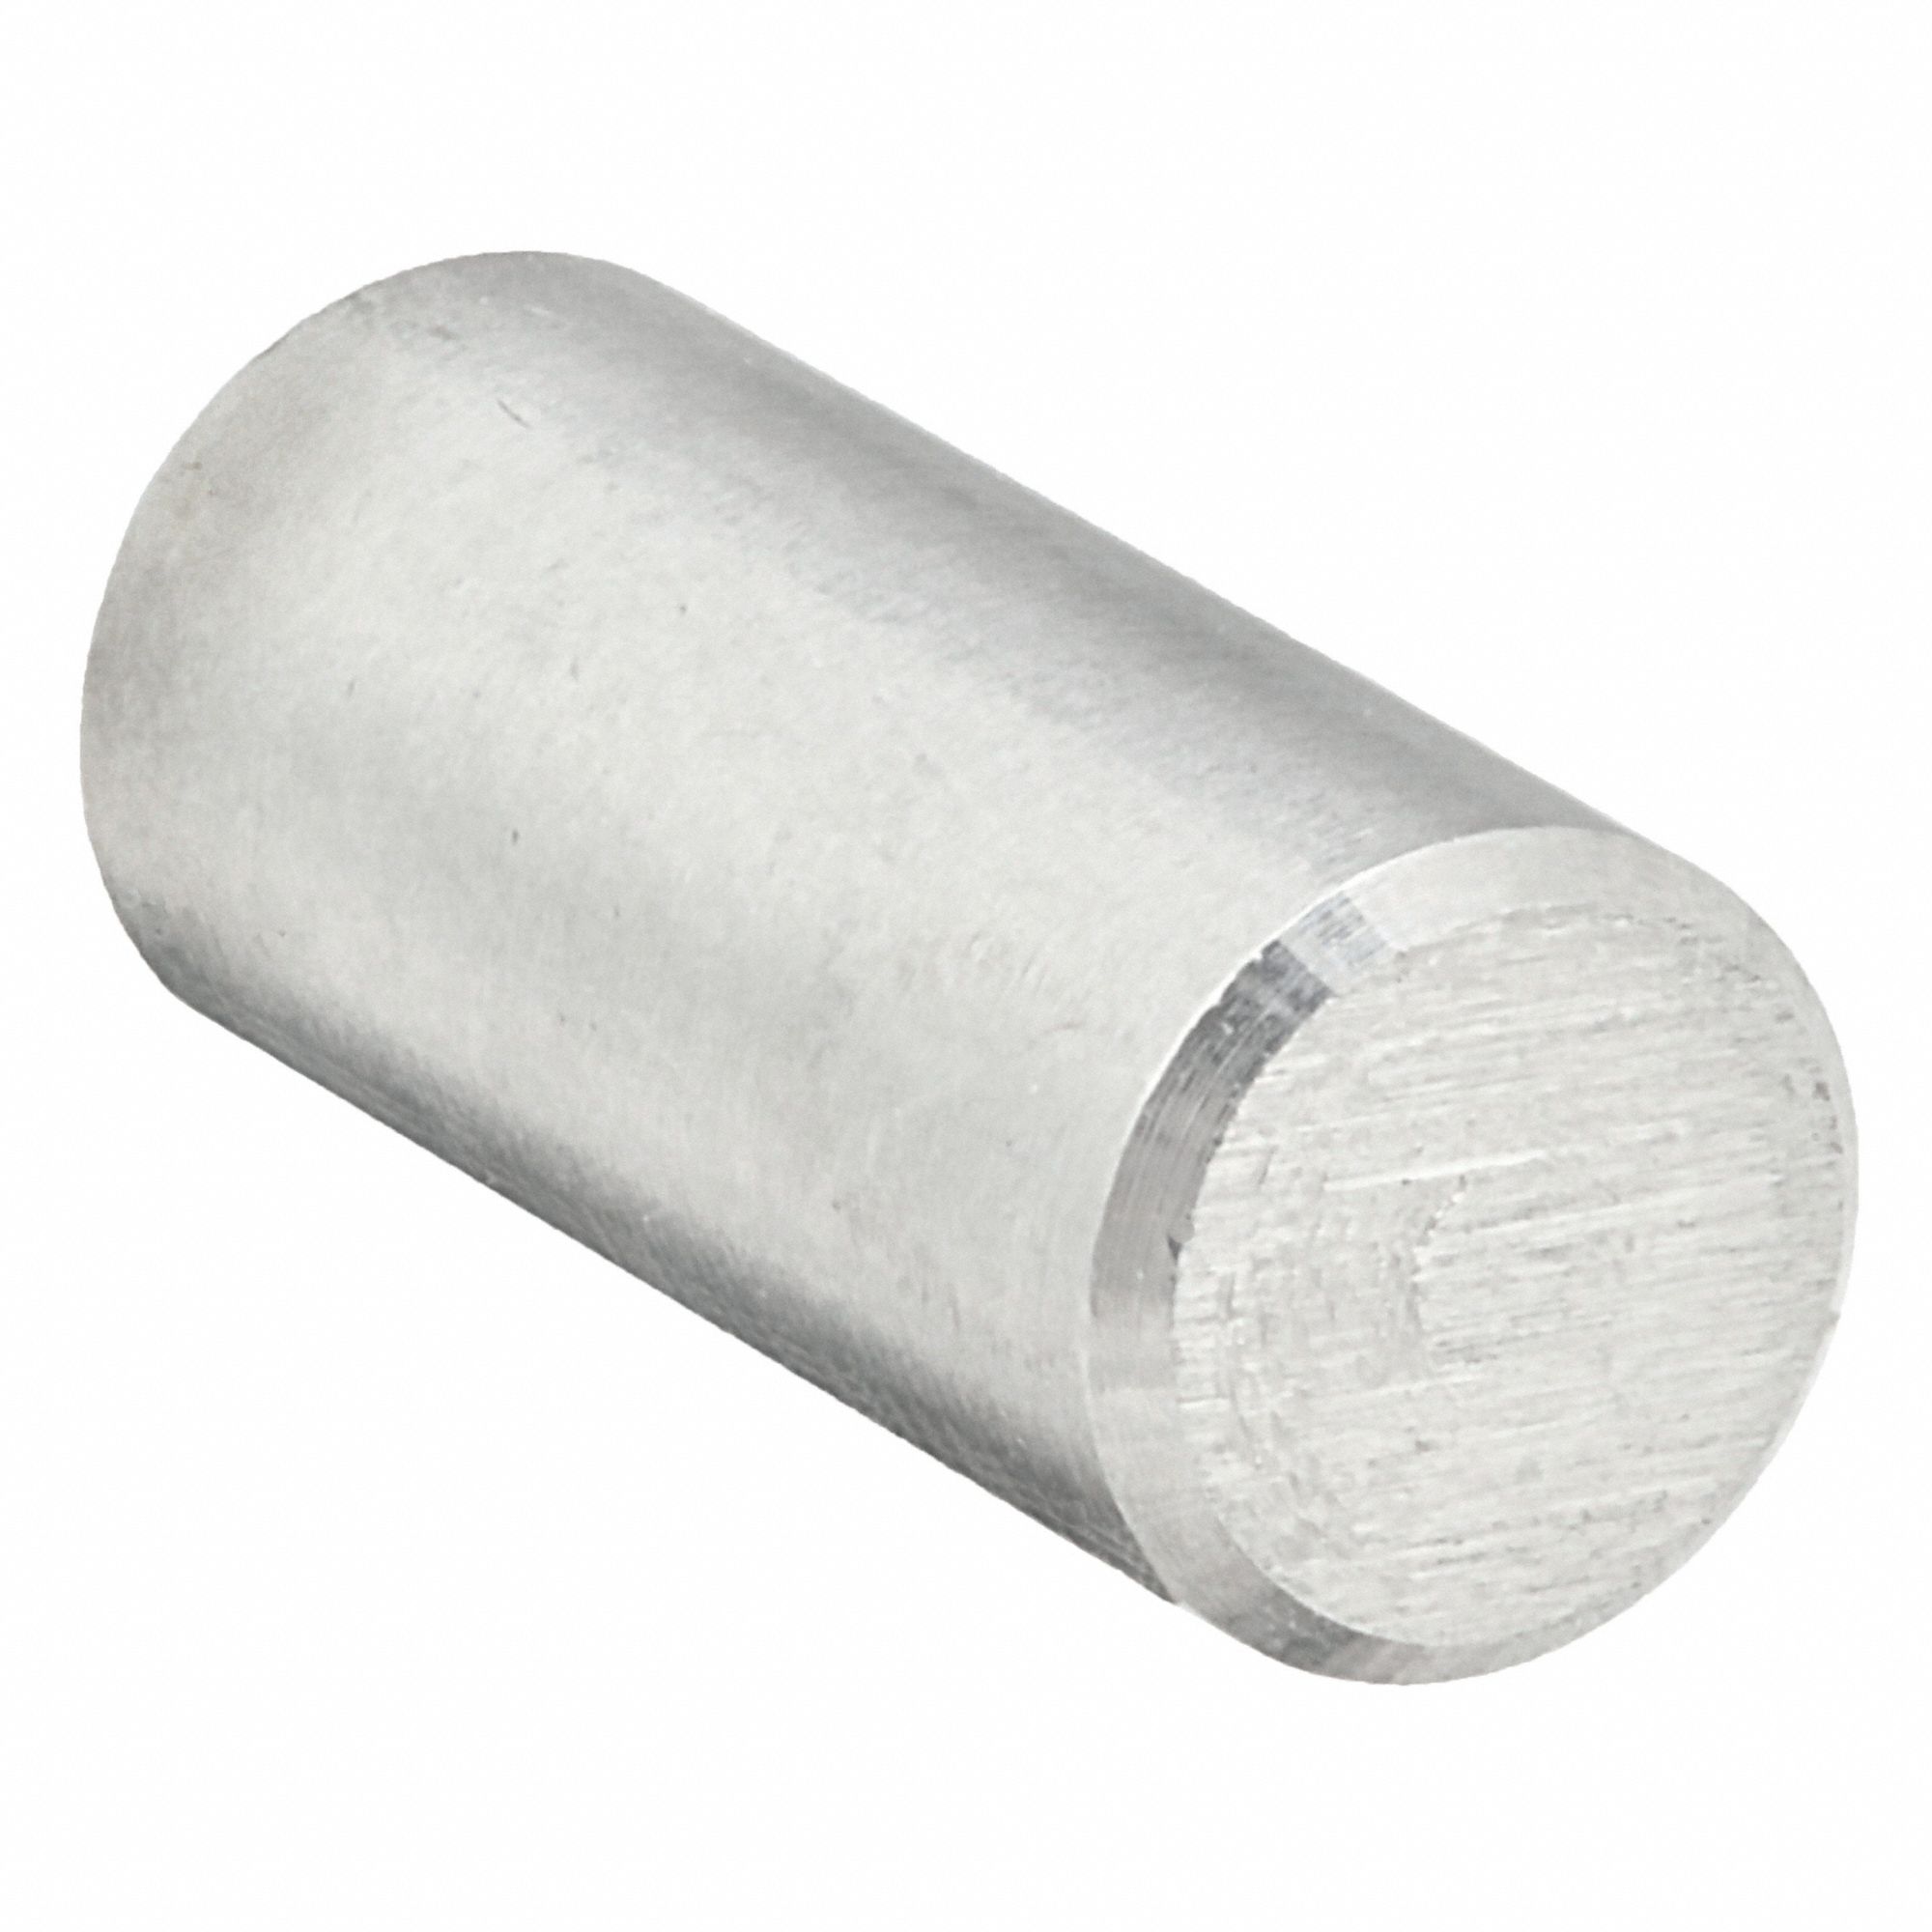 1/8 x 1/2 Stainless Steel Dowel Pin